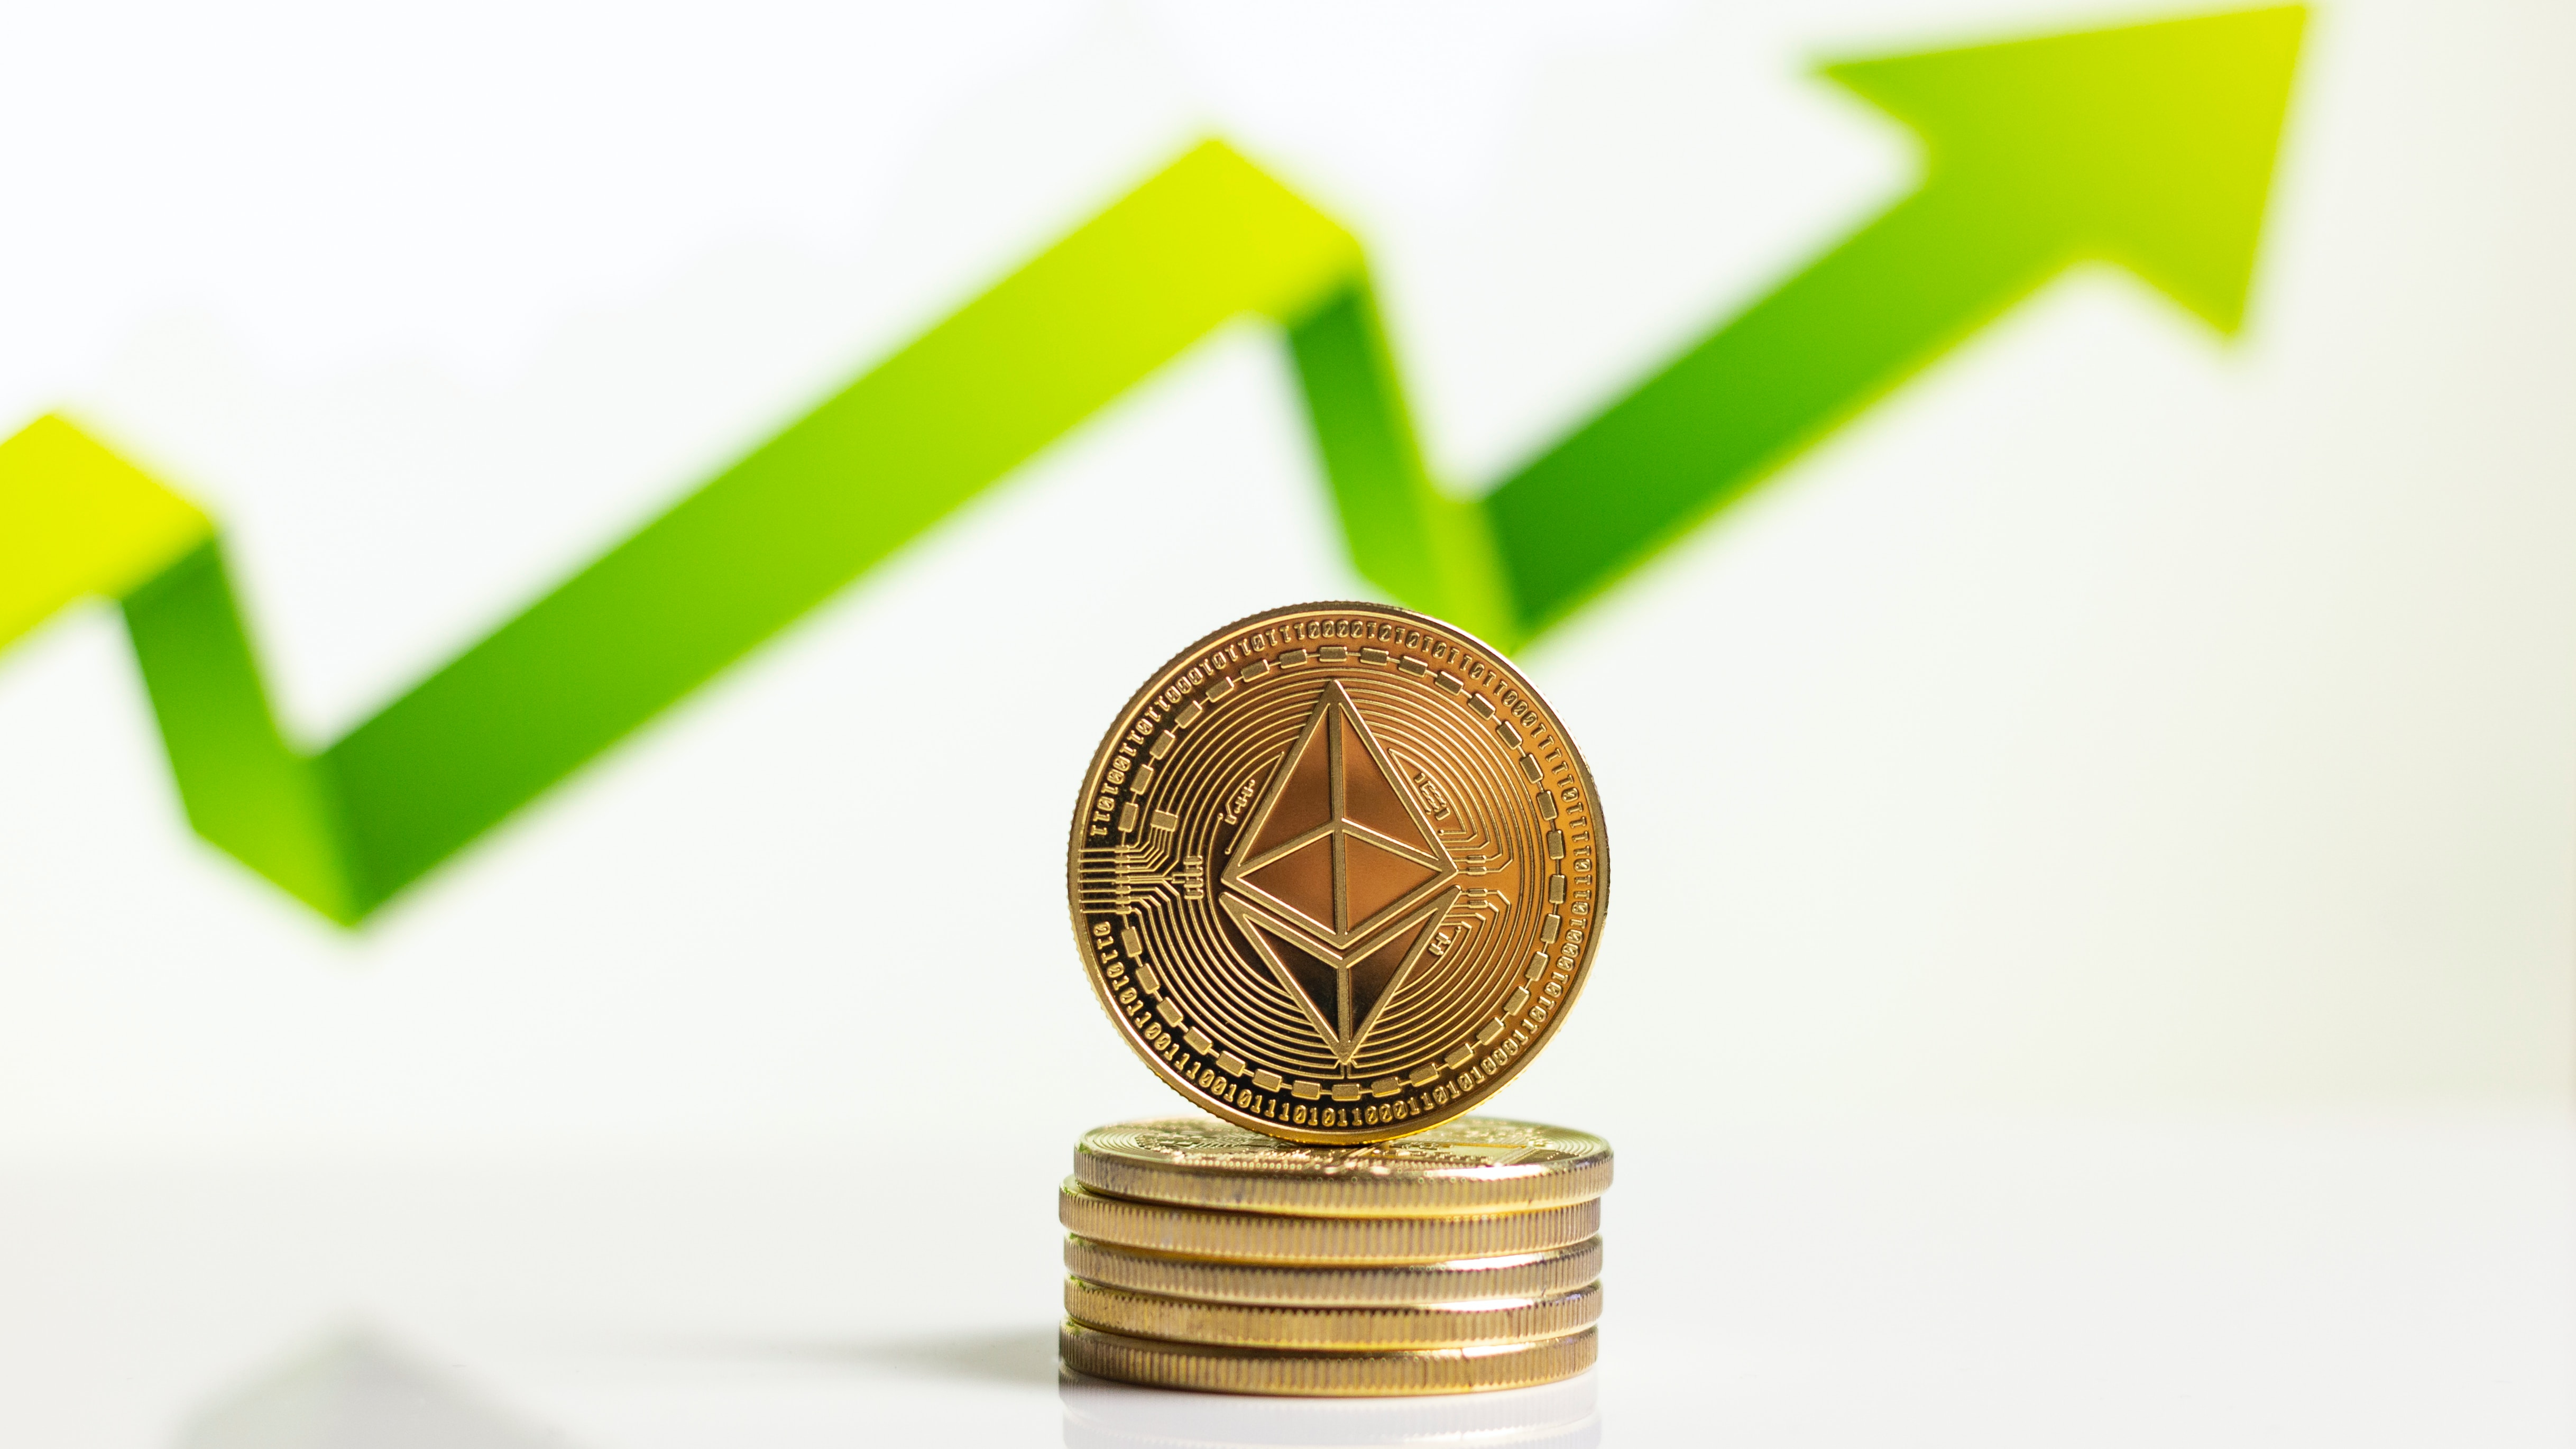 Crypto Analyst Says It’s “Not Too Late” To Buy Ethereum, Here’s Why